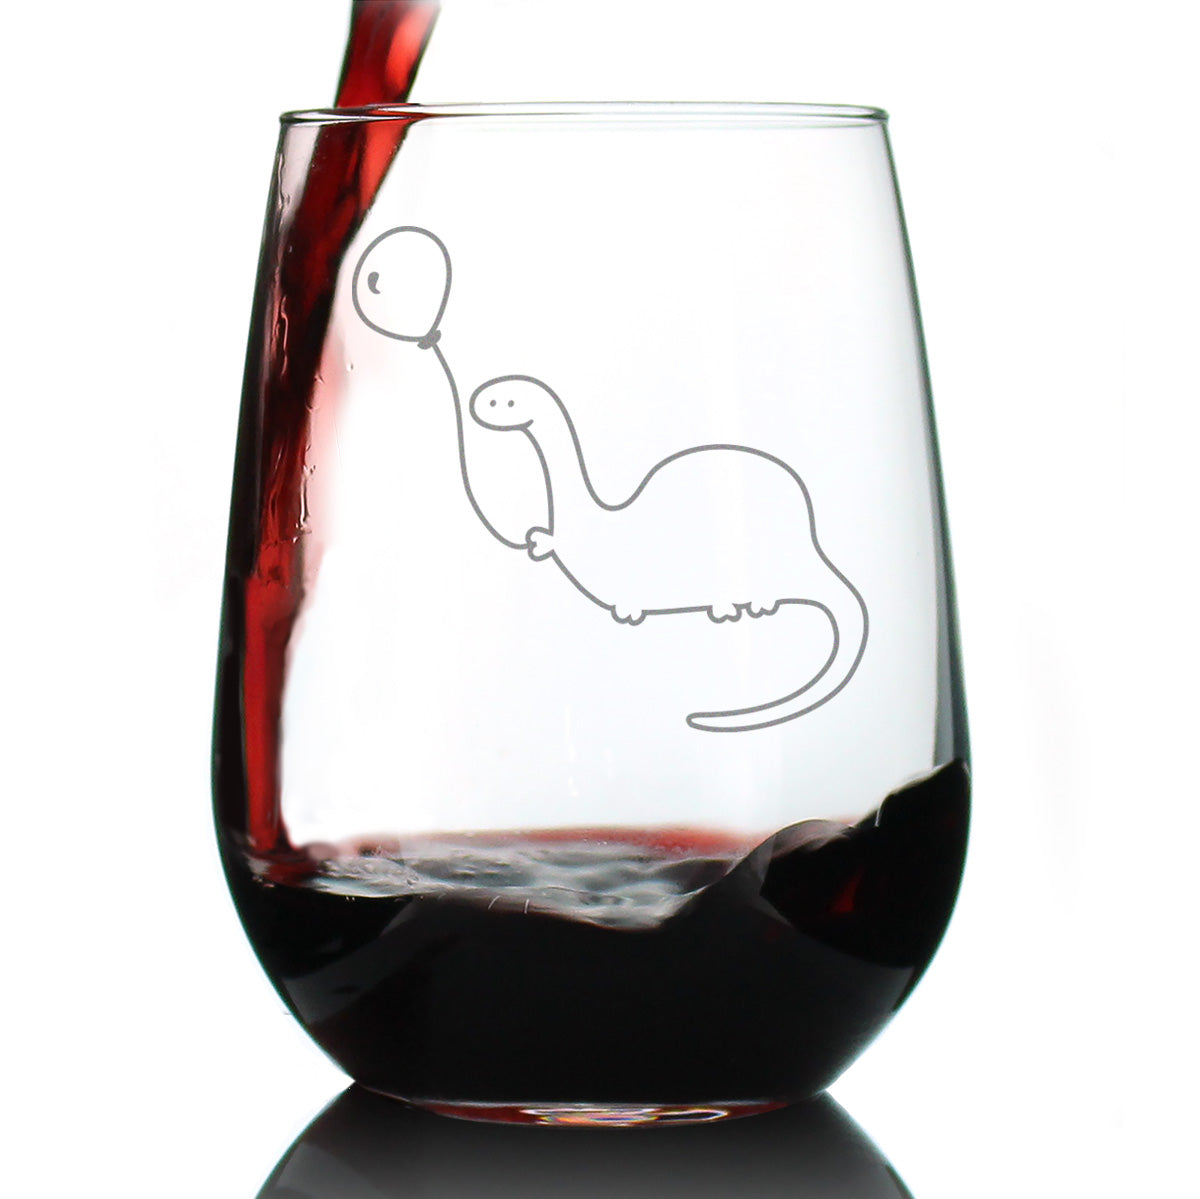 Dinosaur With Birthday Balloon - Stemless Wine Glass - Cute Funny Dino Themed Gifts and Decor for Dinosaur Lovers - Large 17 Oz Glass